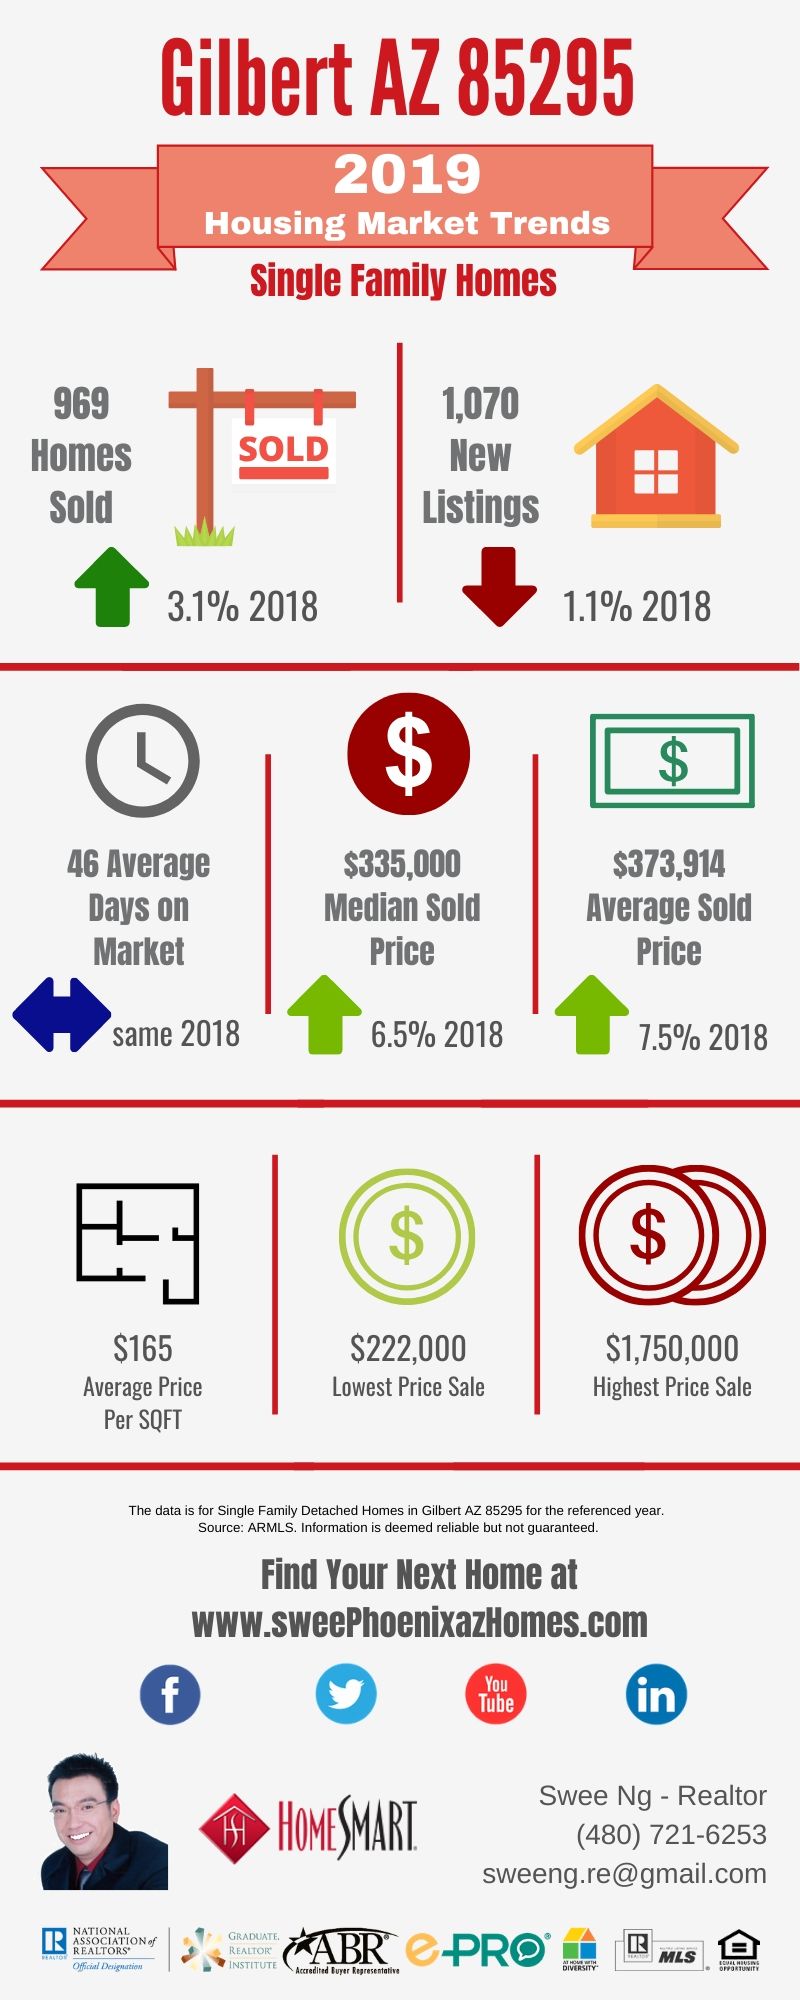 Gilbert AZ 85295 Housing Market Trends Report 2019 by Swee Ng, Real Estate and House Value